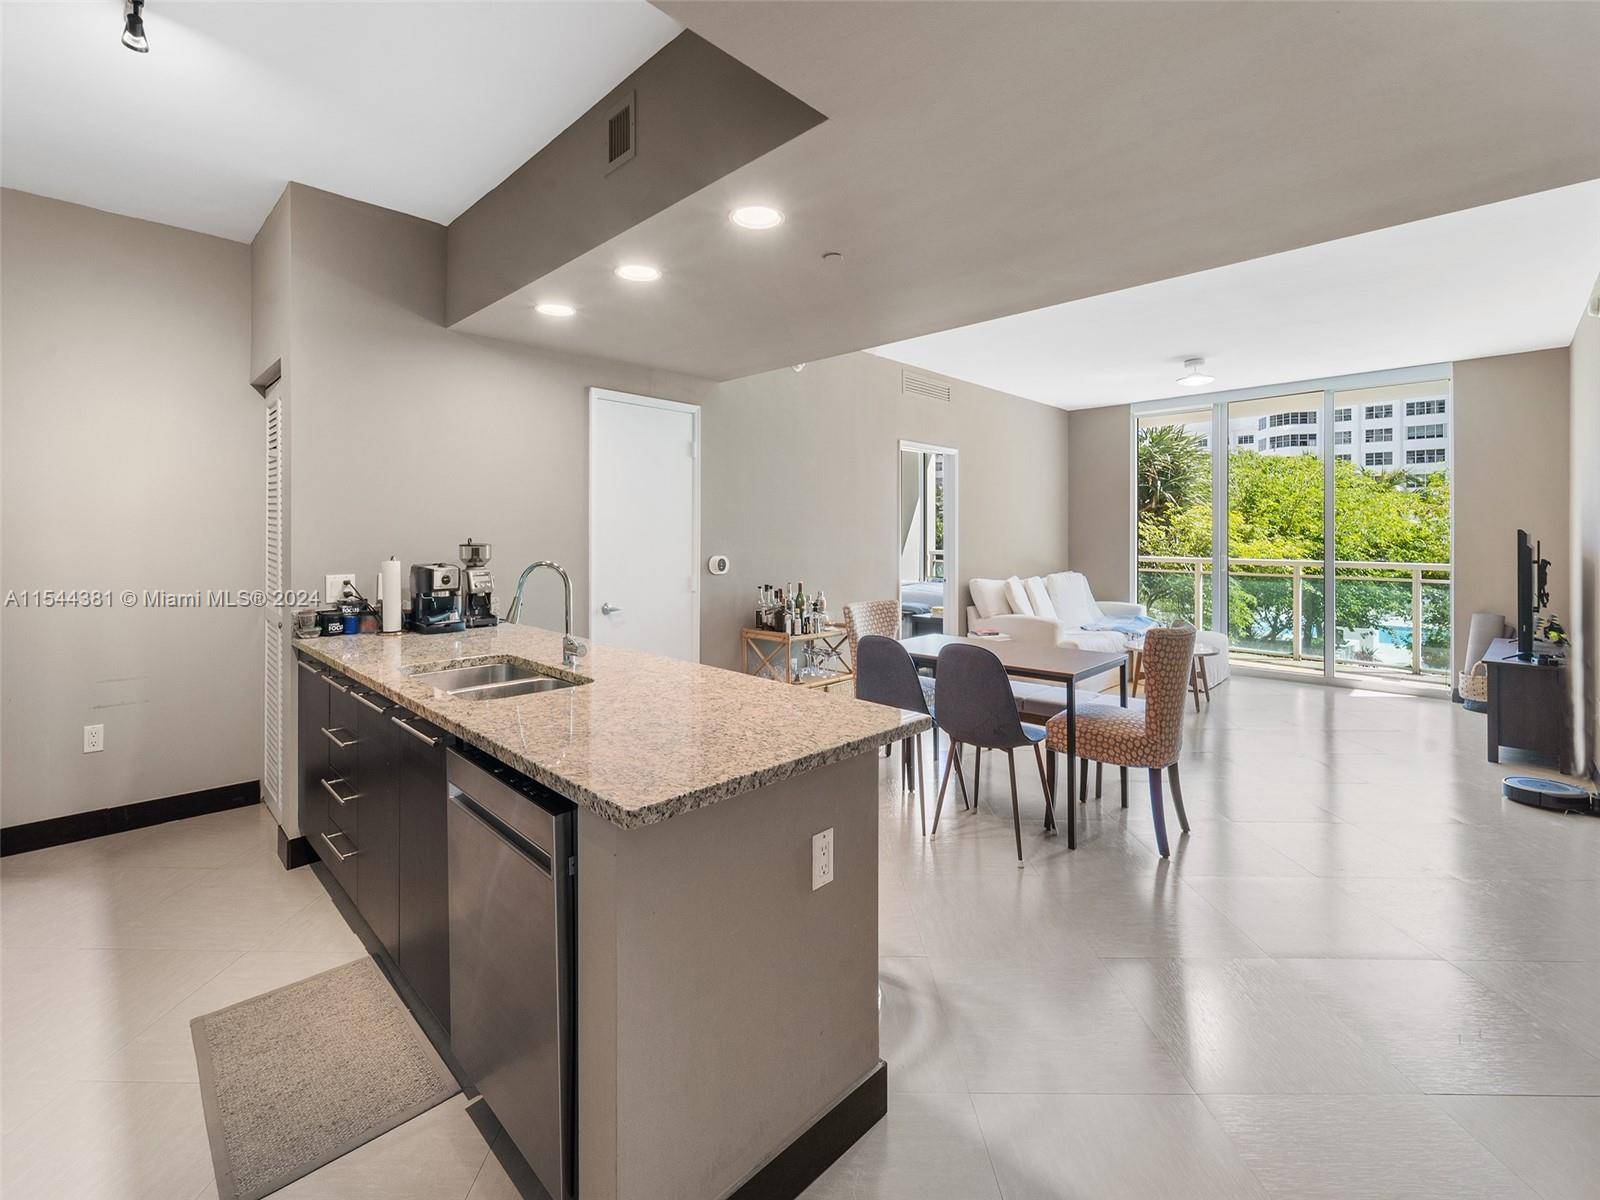 Gorgeous, bright, spacious 2 2 condo in the center of it all at The Plaza On Brickell.